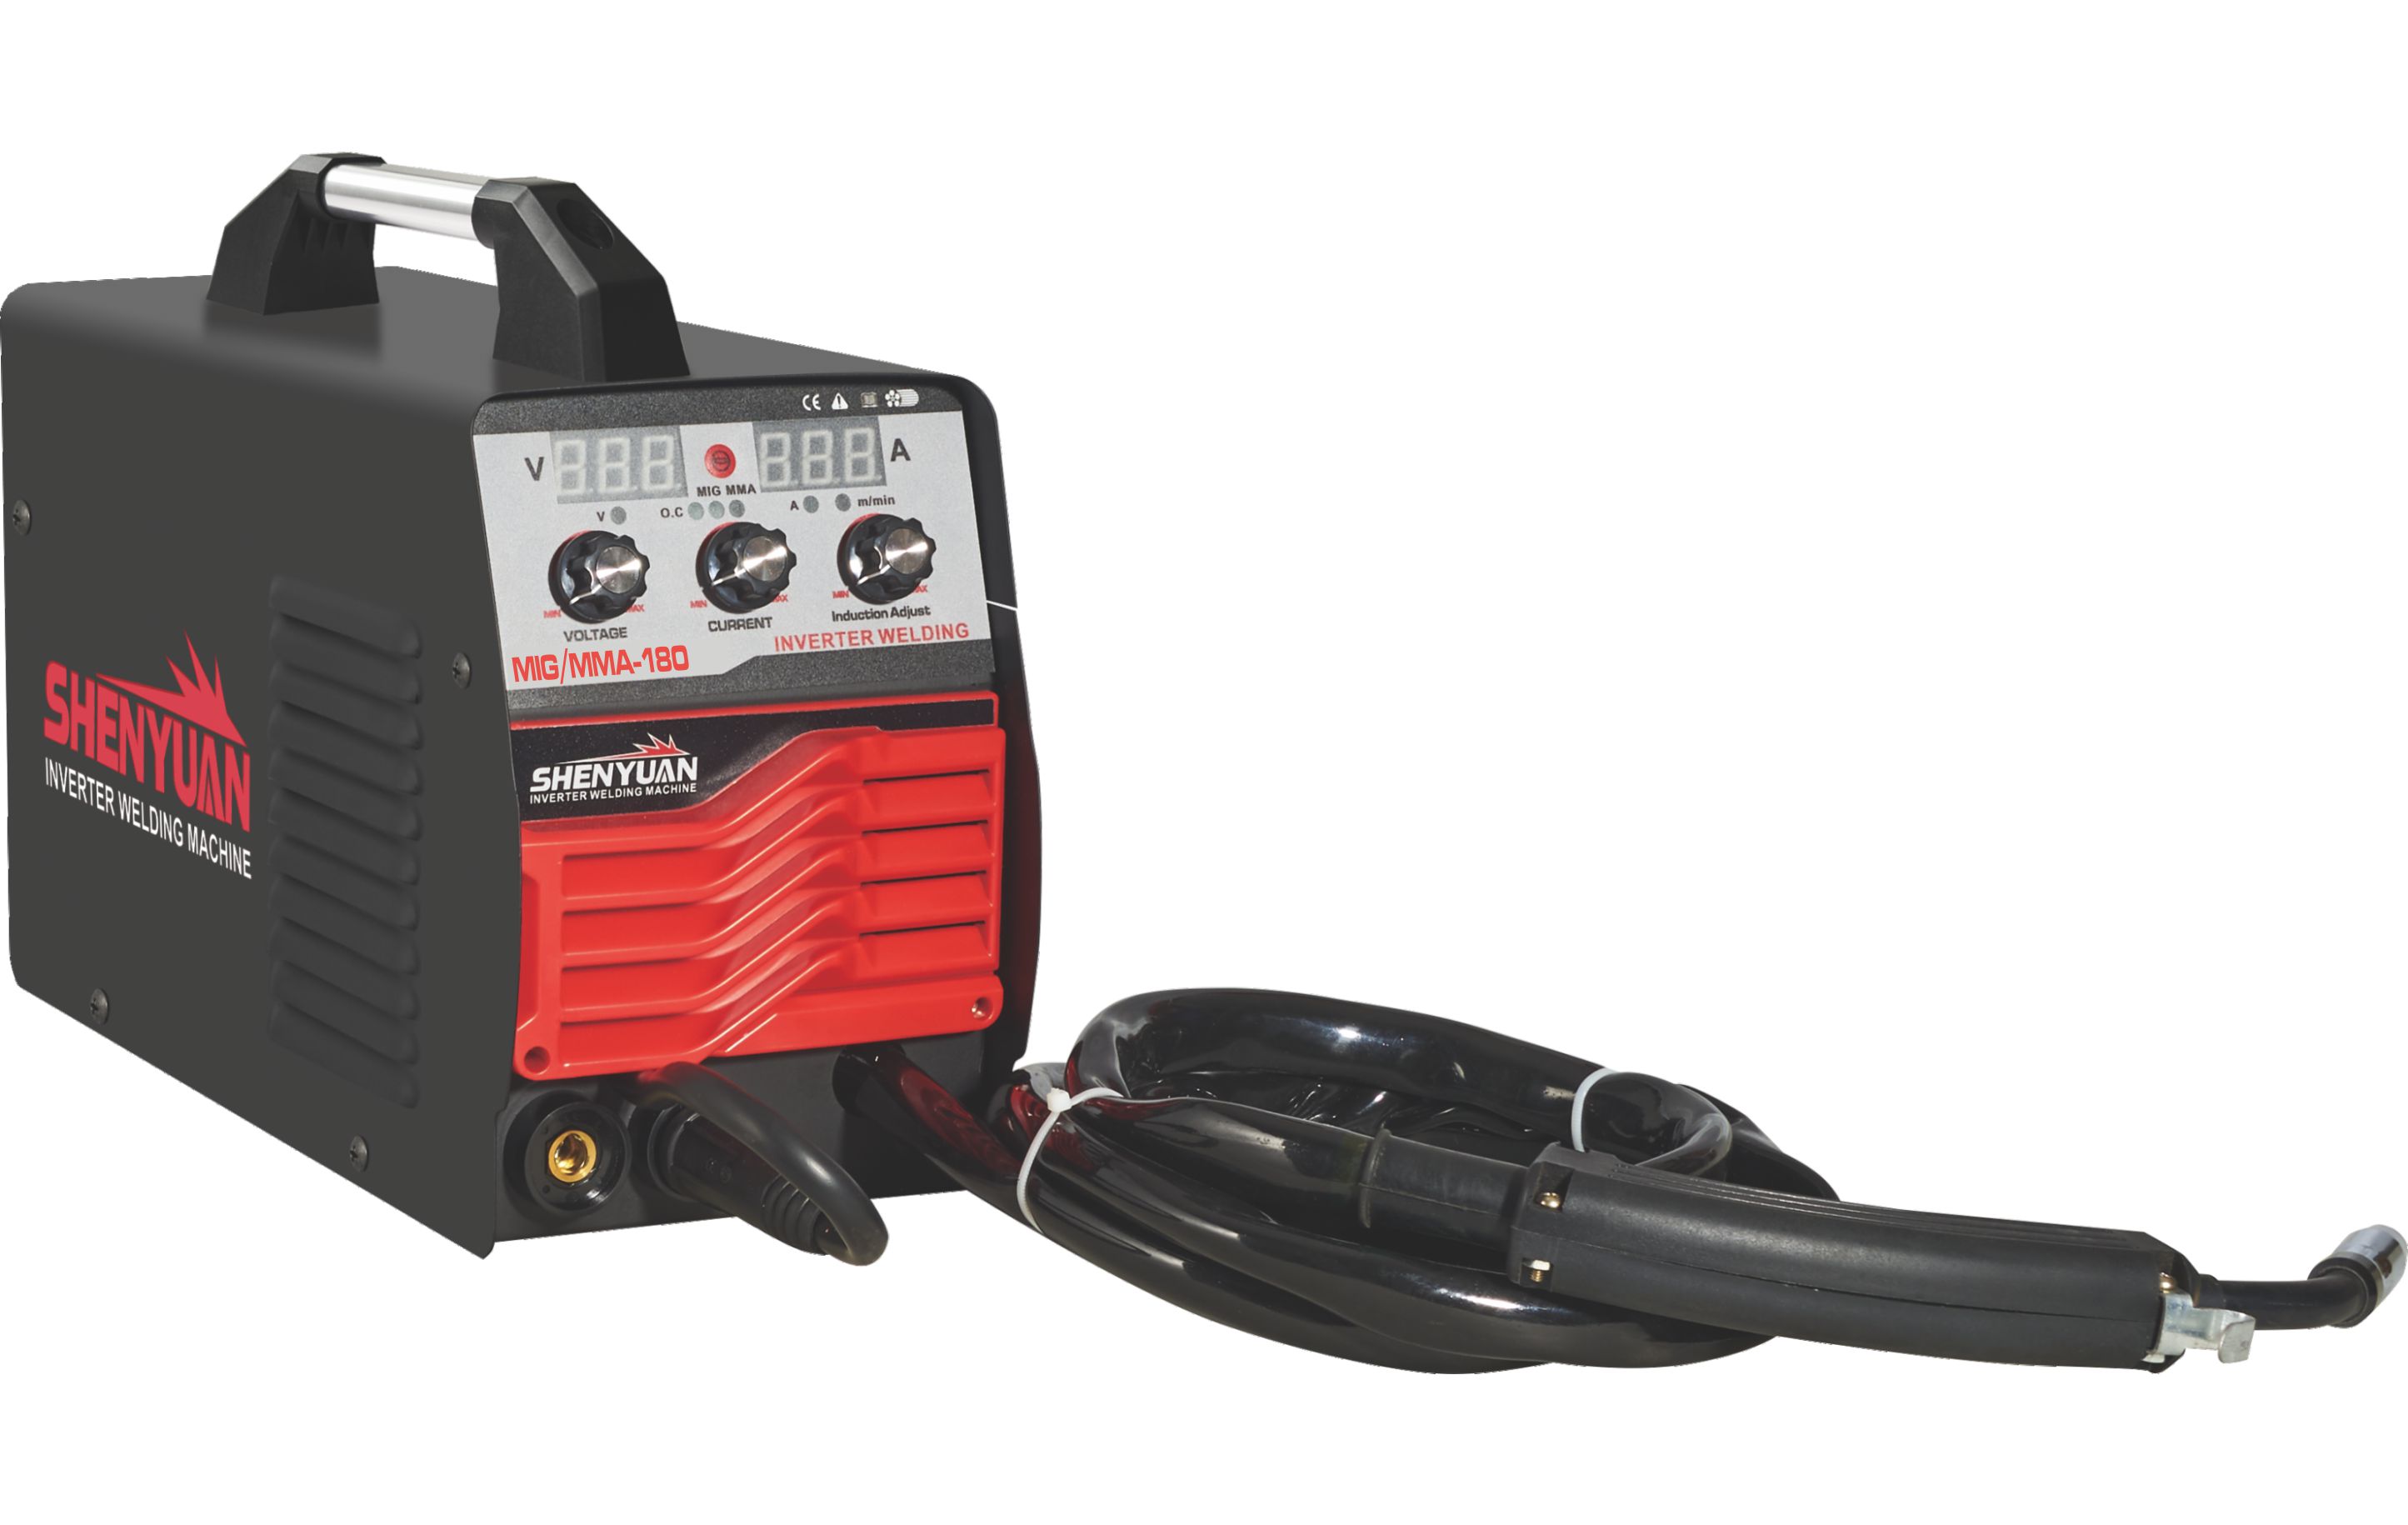 INVERTER  CO2 GAS PROTECTION WELDING MACHINE MIG/MMA-21 SERIES  MIG/MMA-180A-Y-211kg